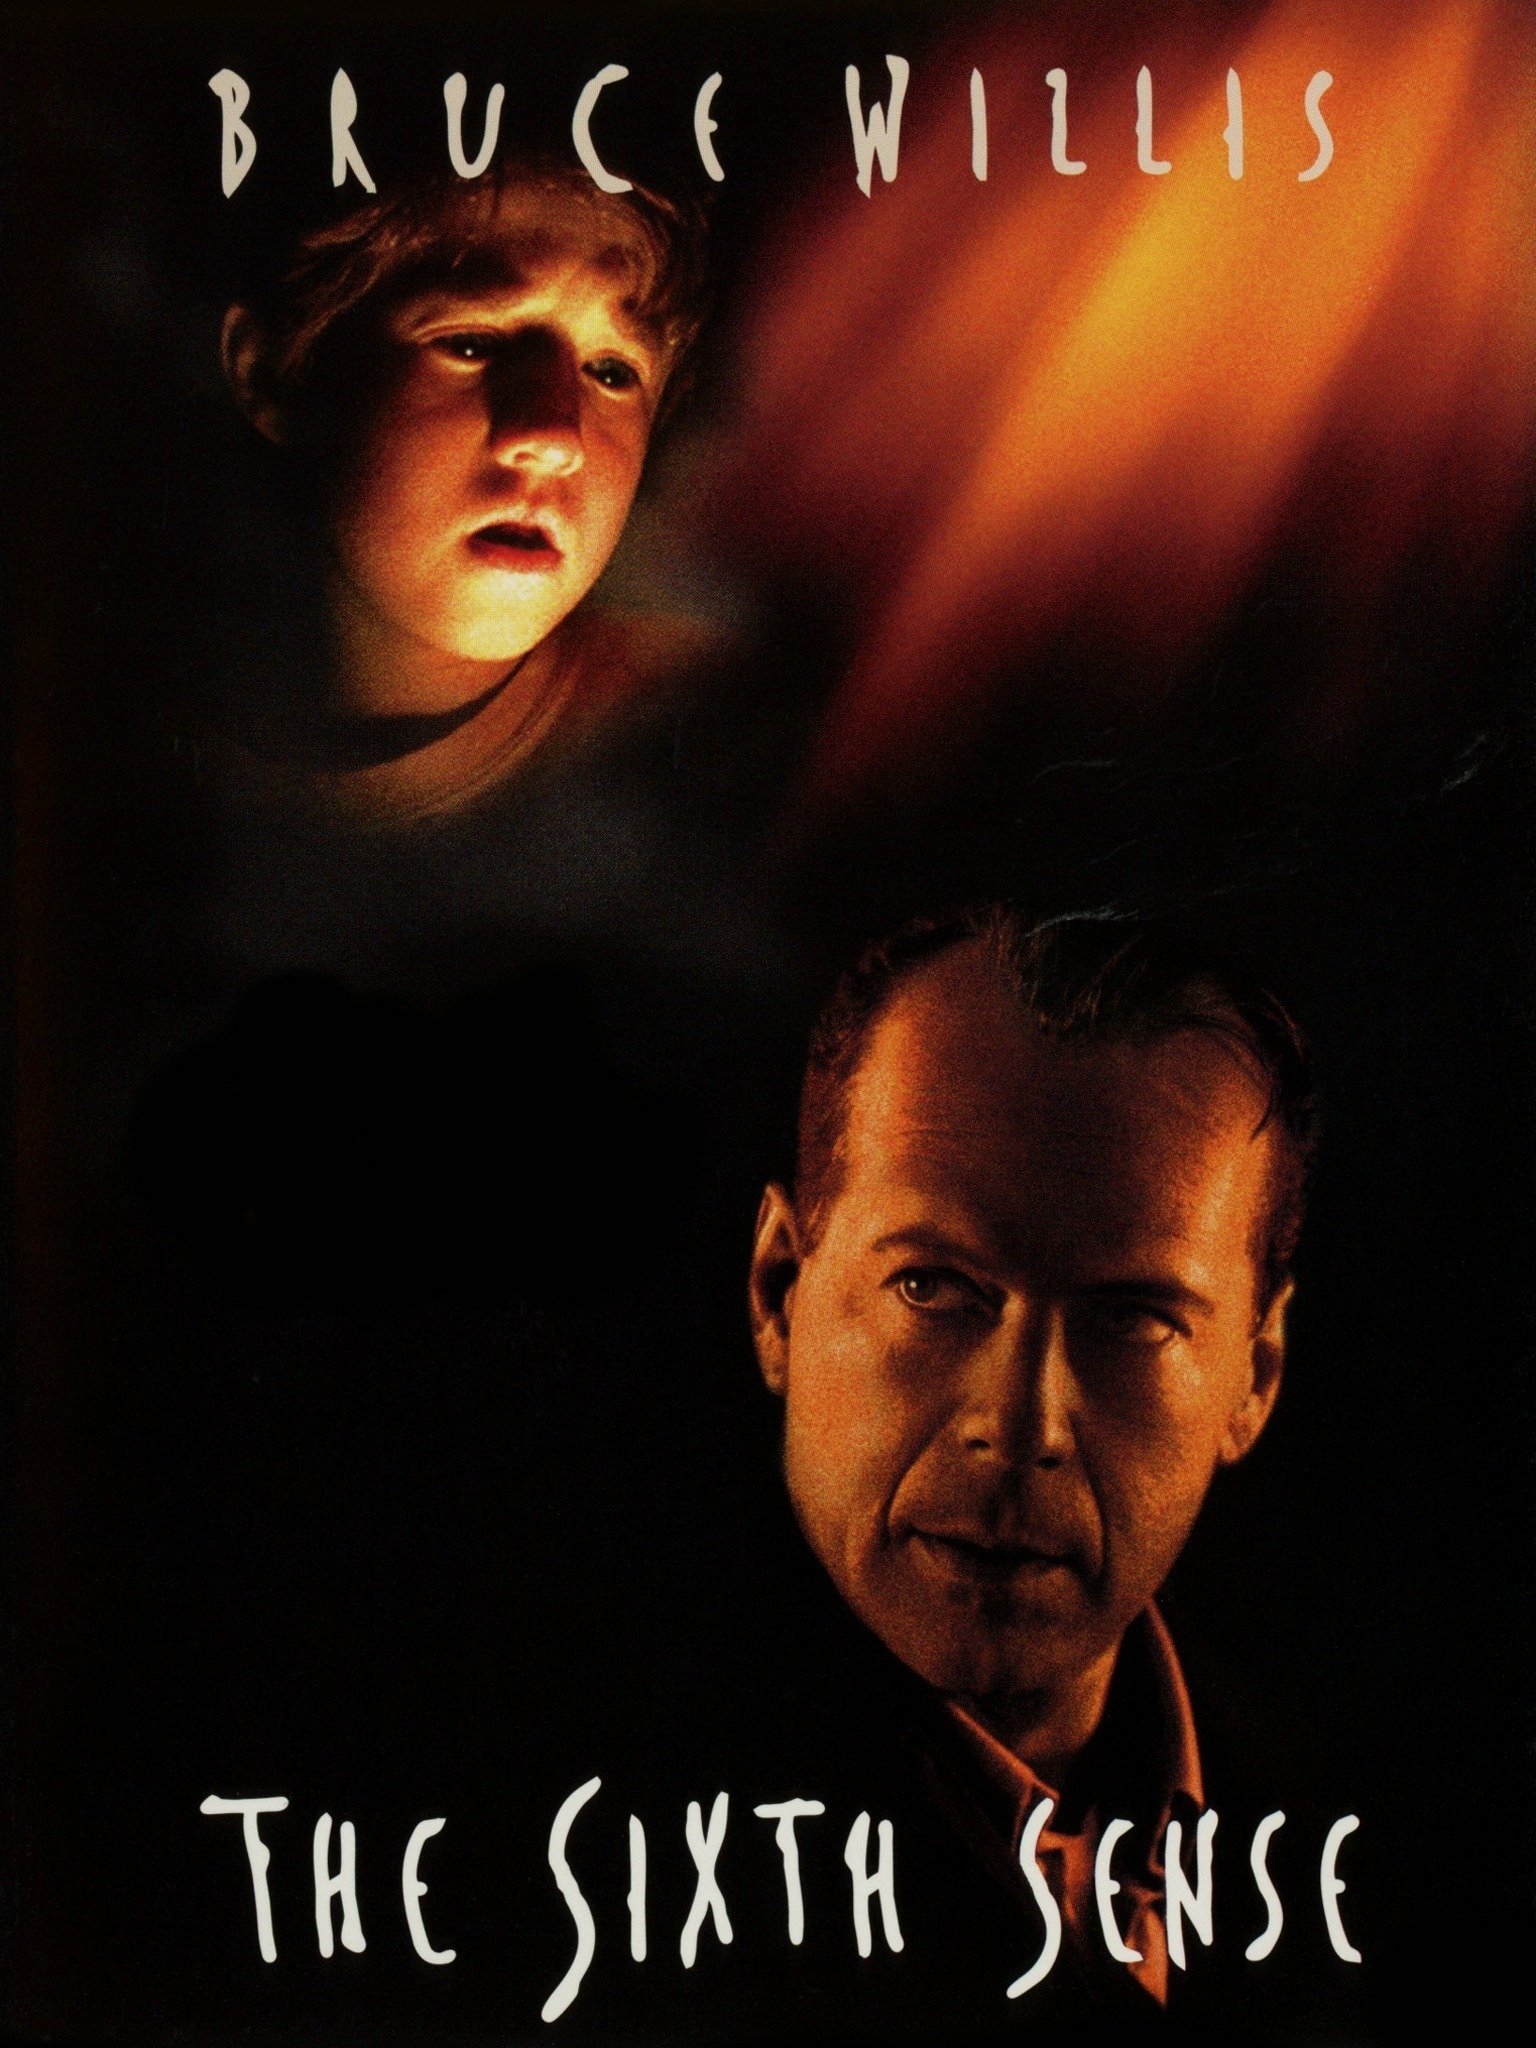 The Sixth Sense Trailer 1 Trailers And Videos Rotten Tomatoes